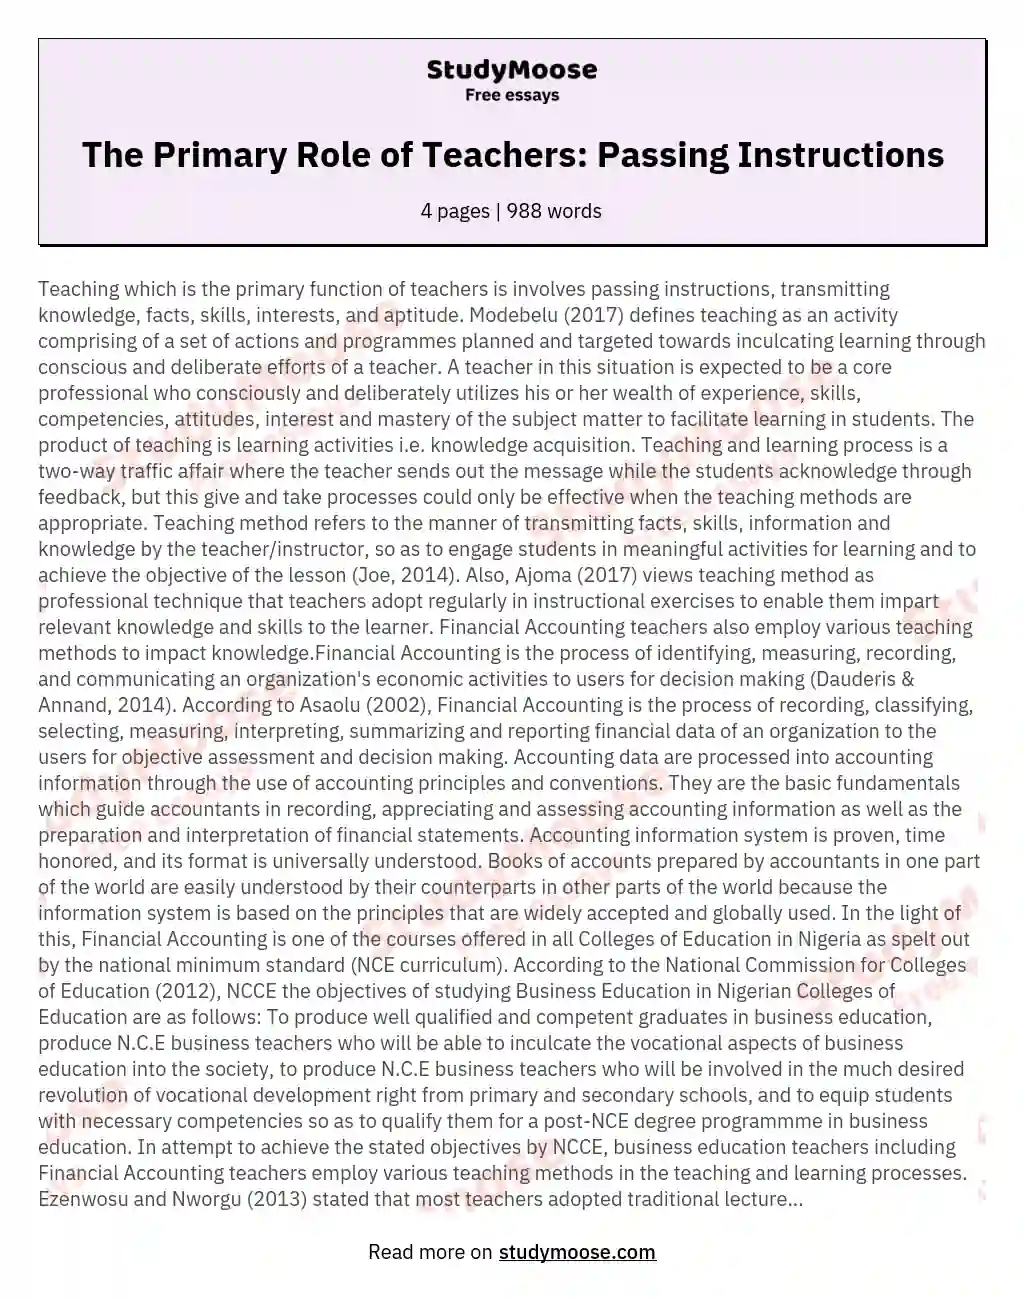 Teaching which is the primary function of teachers is involves passing instructions